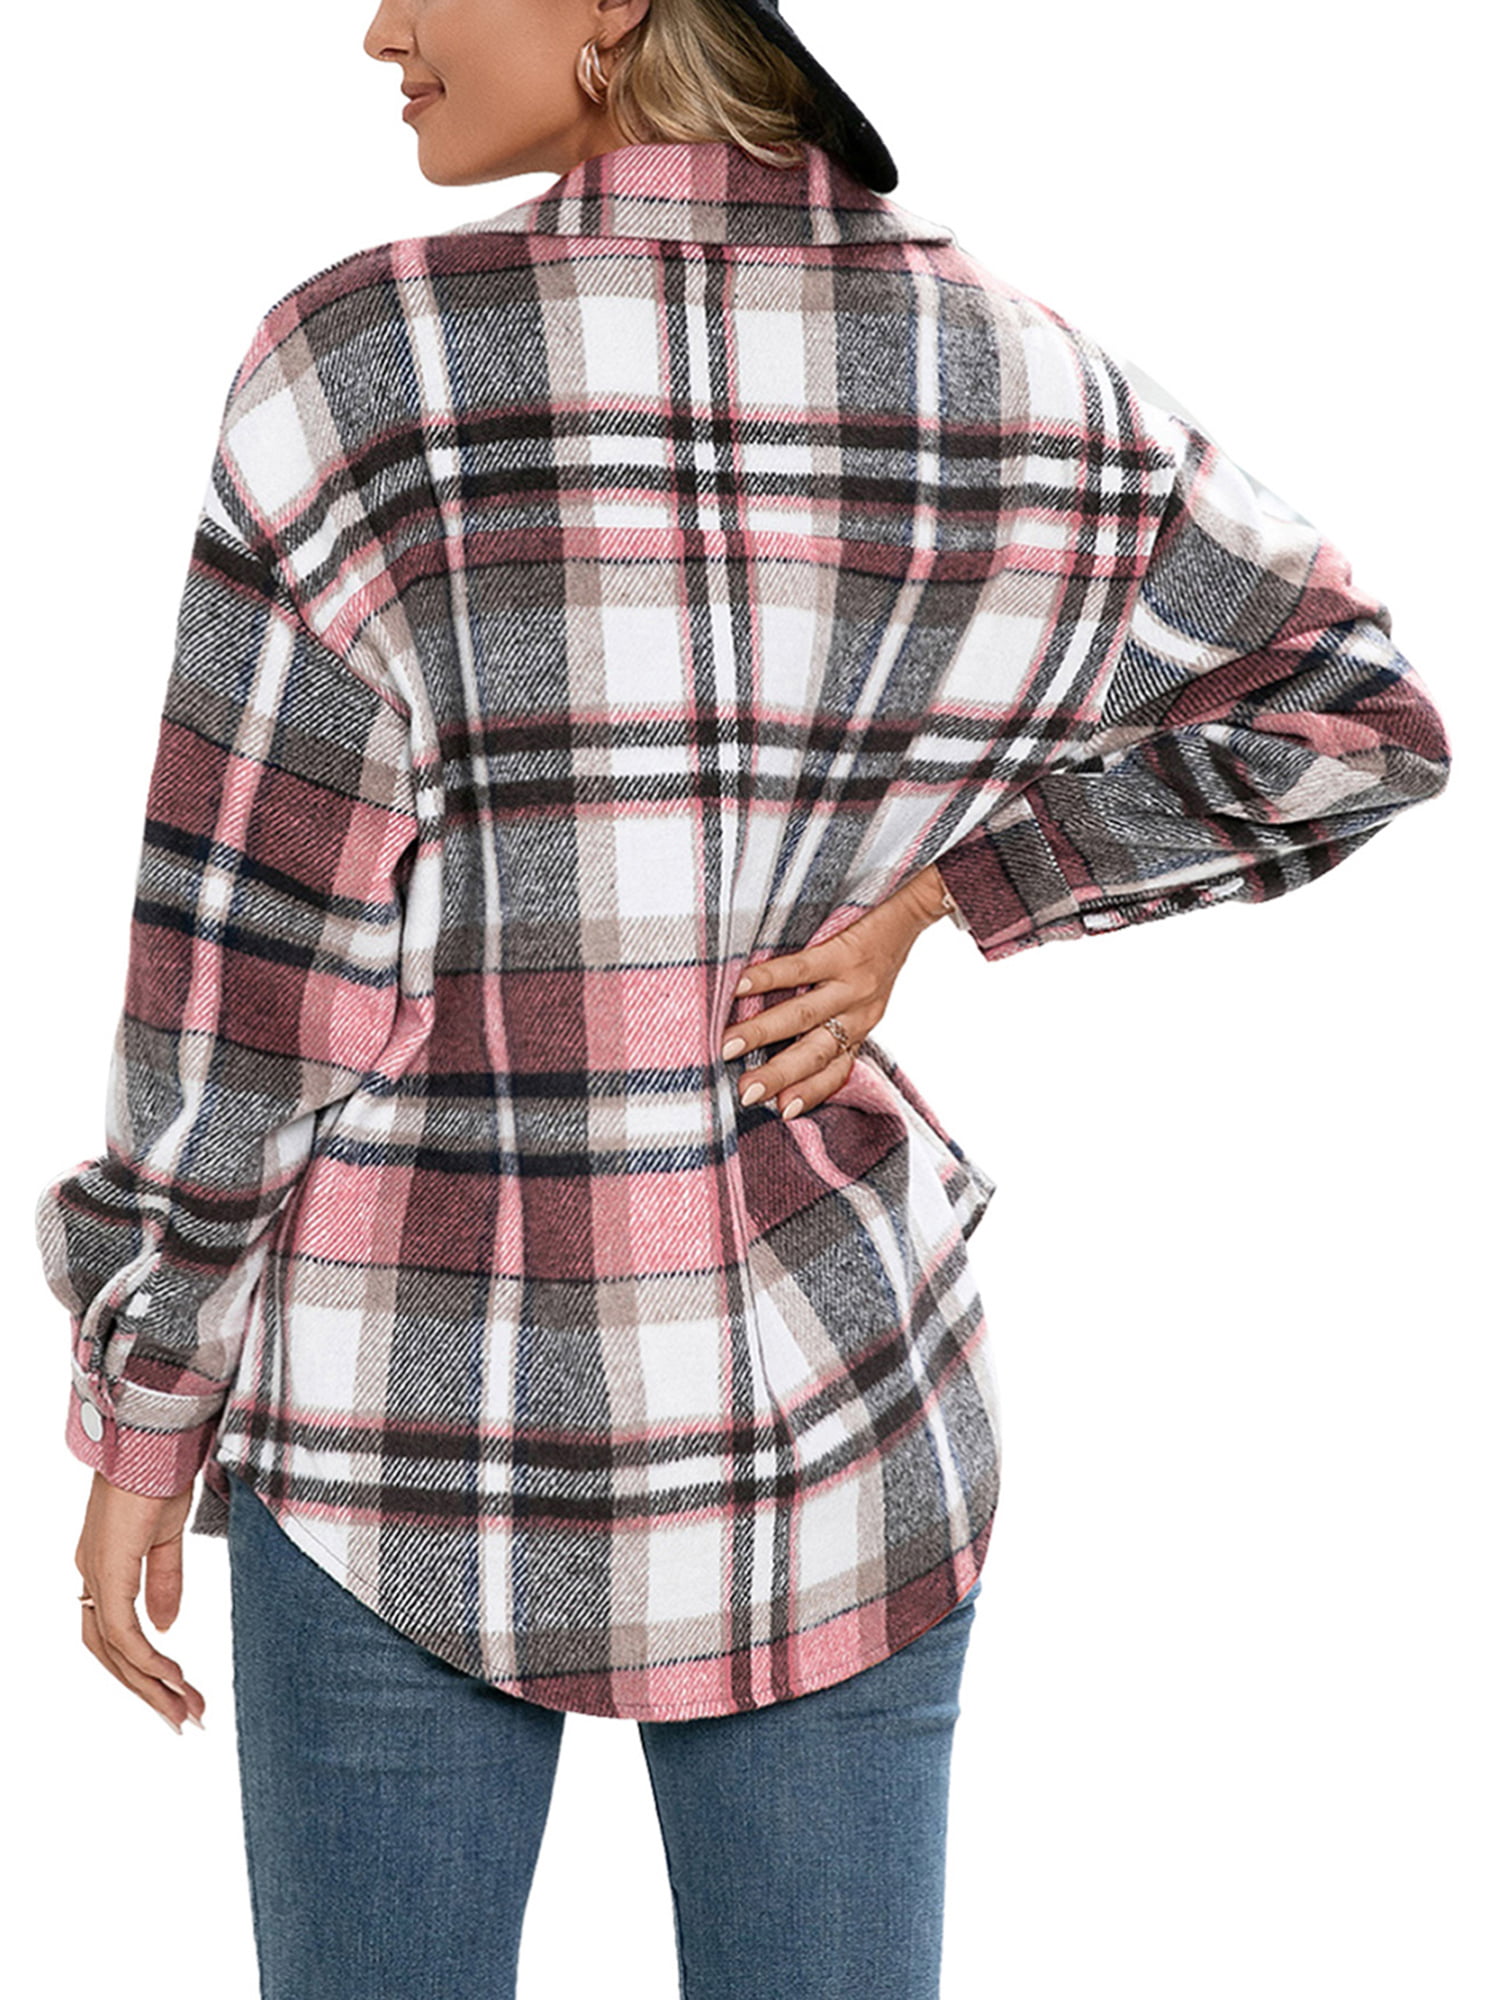 Ladies Plaid Shirt Top Jacket Women Coat Blouse Sweat shirt GridPrint Tops  Fashion Cotton T-shirt Long Sleeve Shirts for Women Reduced Price and  Clearance Sale 